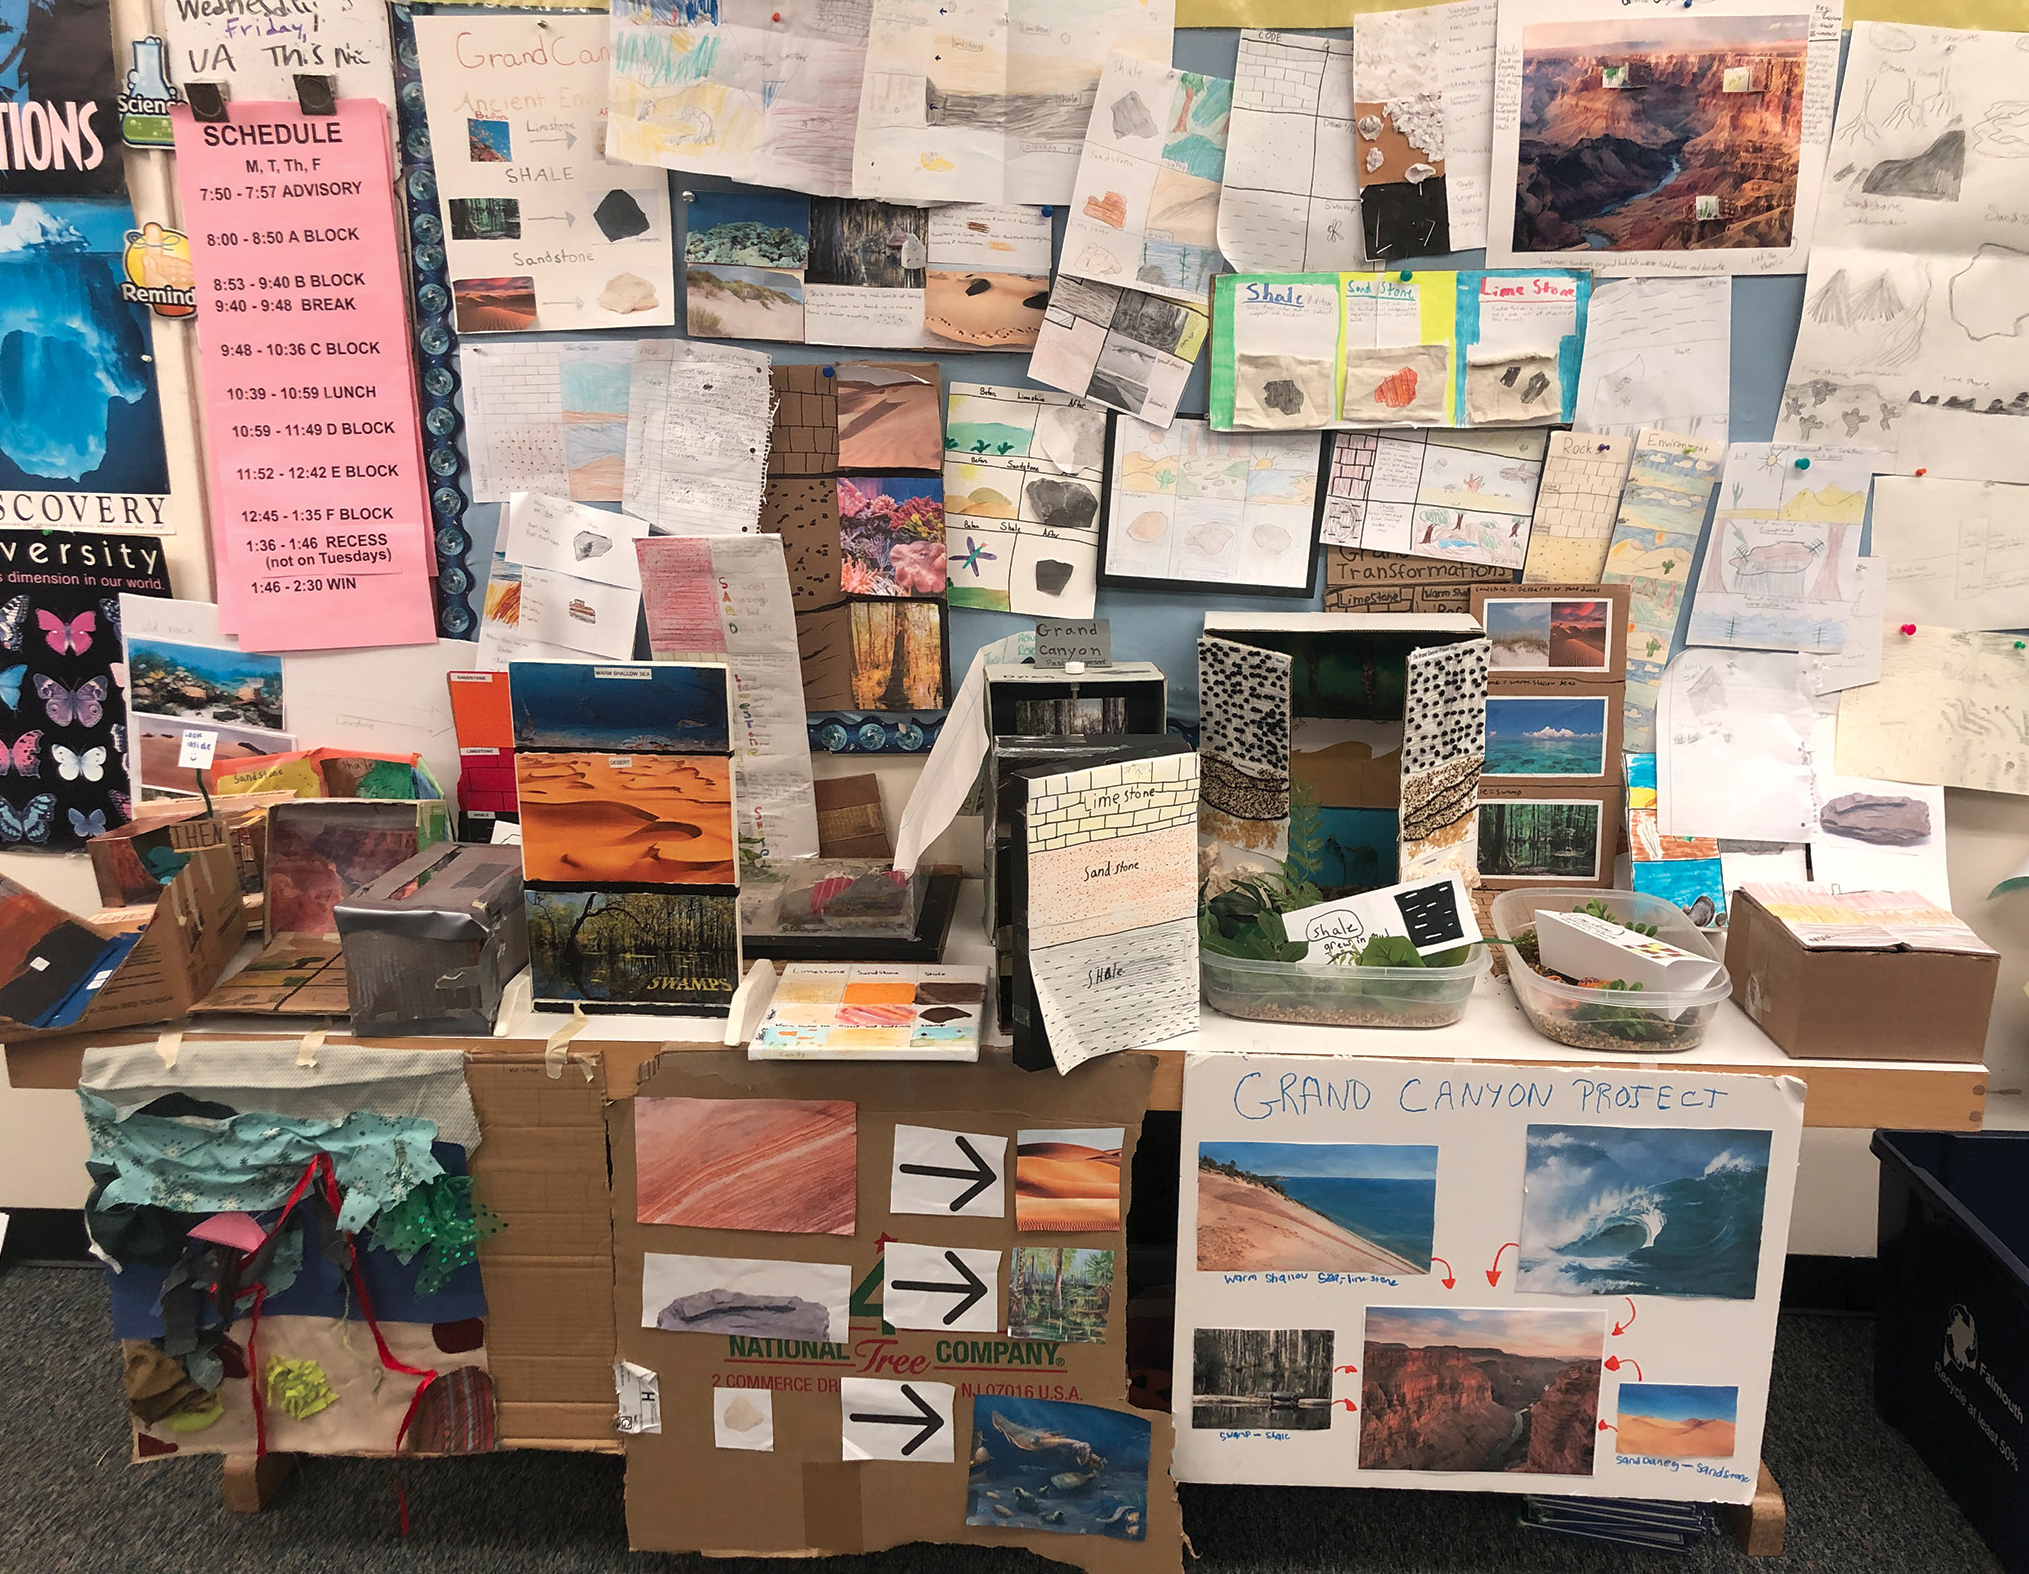 Student models of the Grand Canyon’s layers where supplies were provided by the teacher.